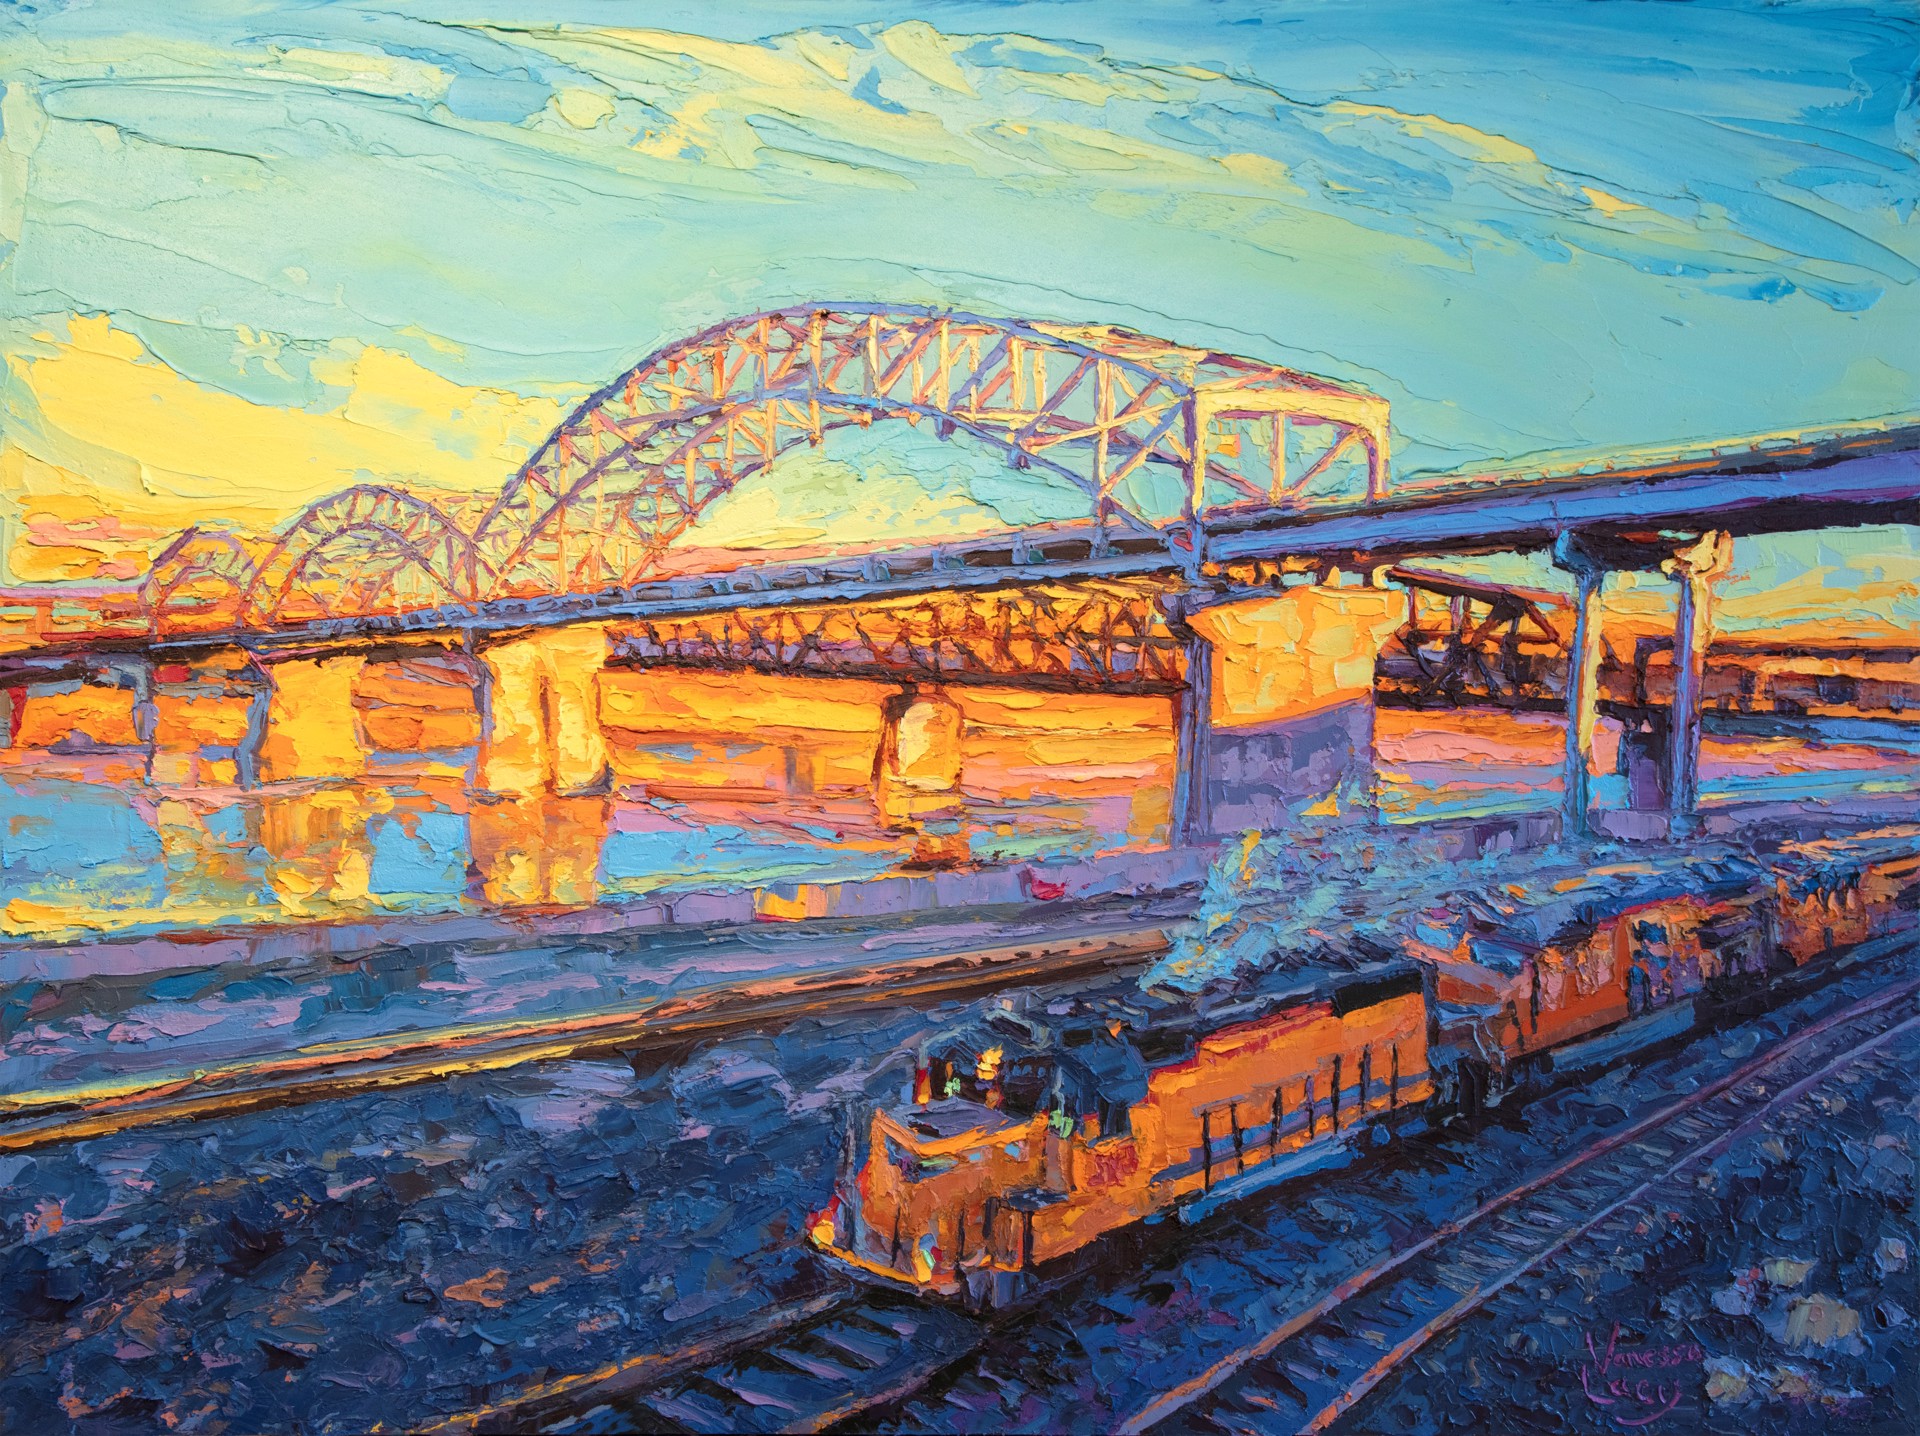 Broadway Bridge with Train by Vanessa Lacy